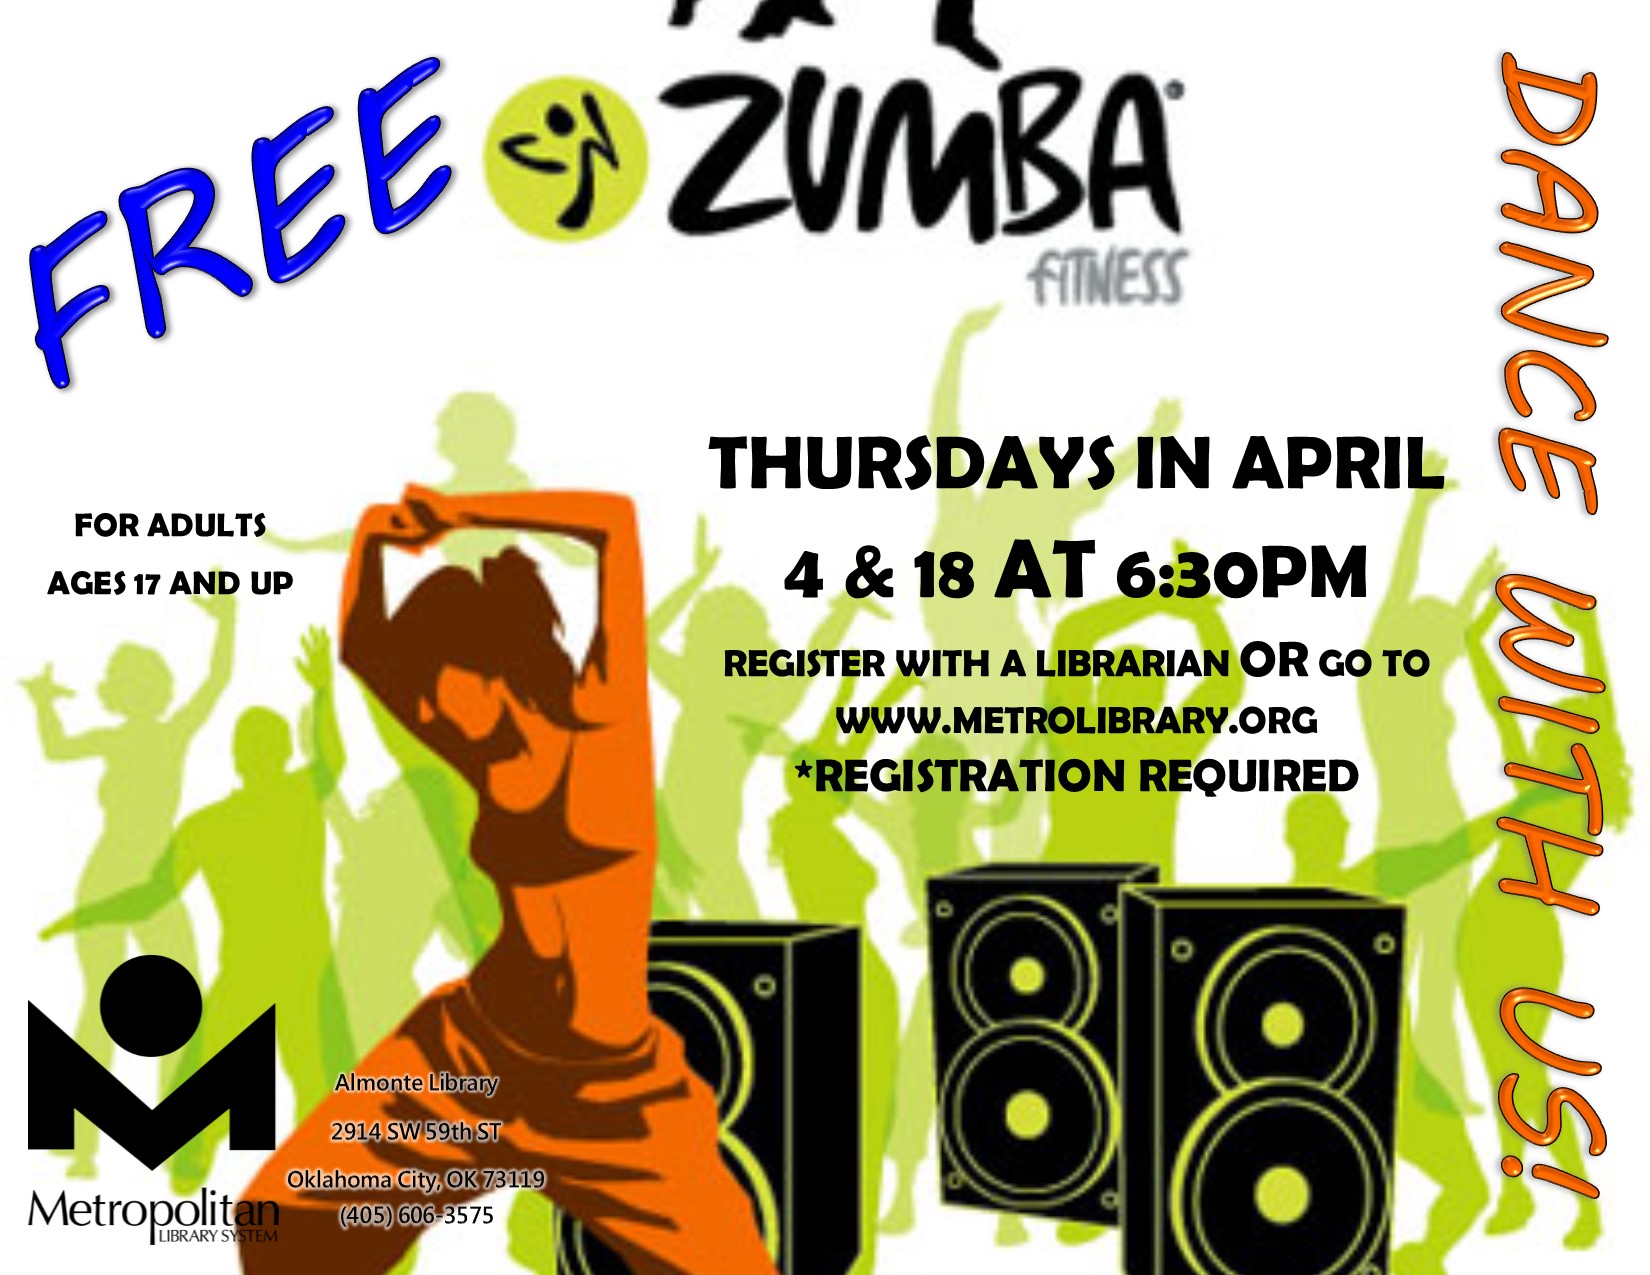 Free Zumba on Thursdays in April 4 & 18! Come Dance with Us!